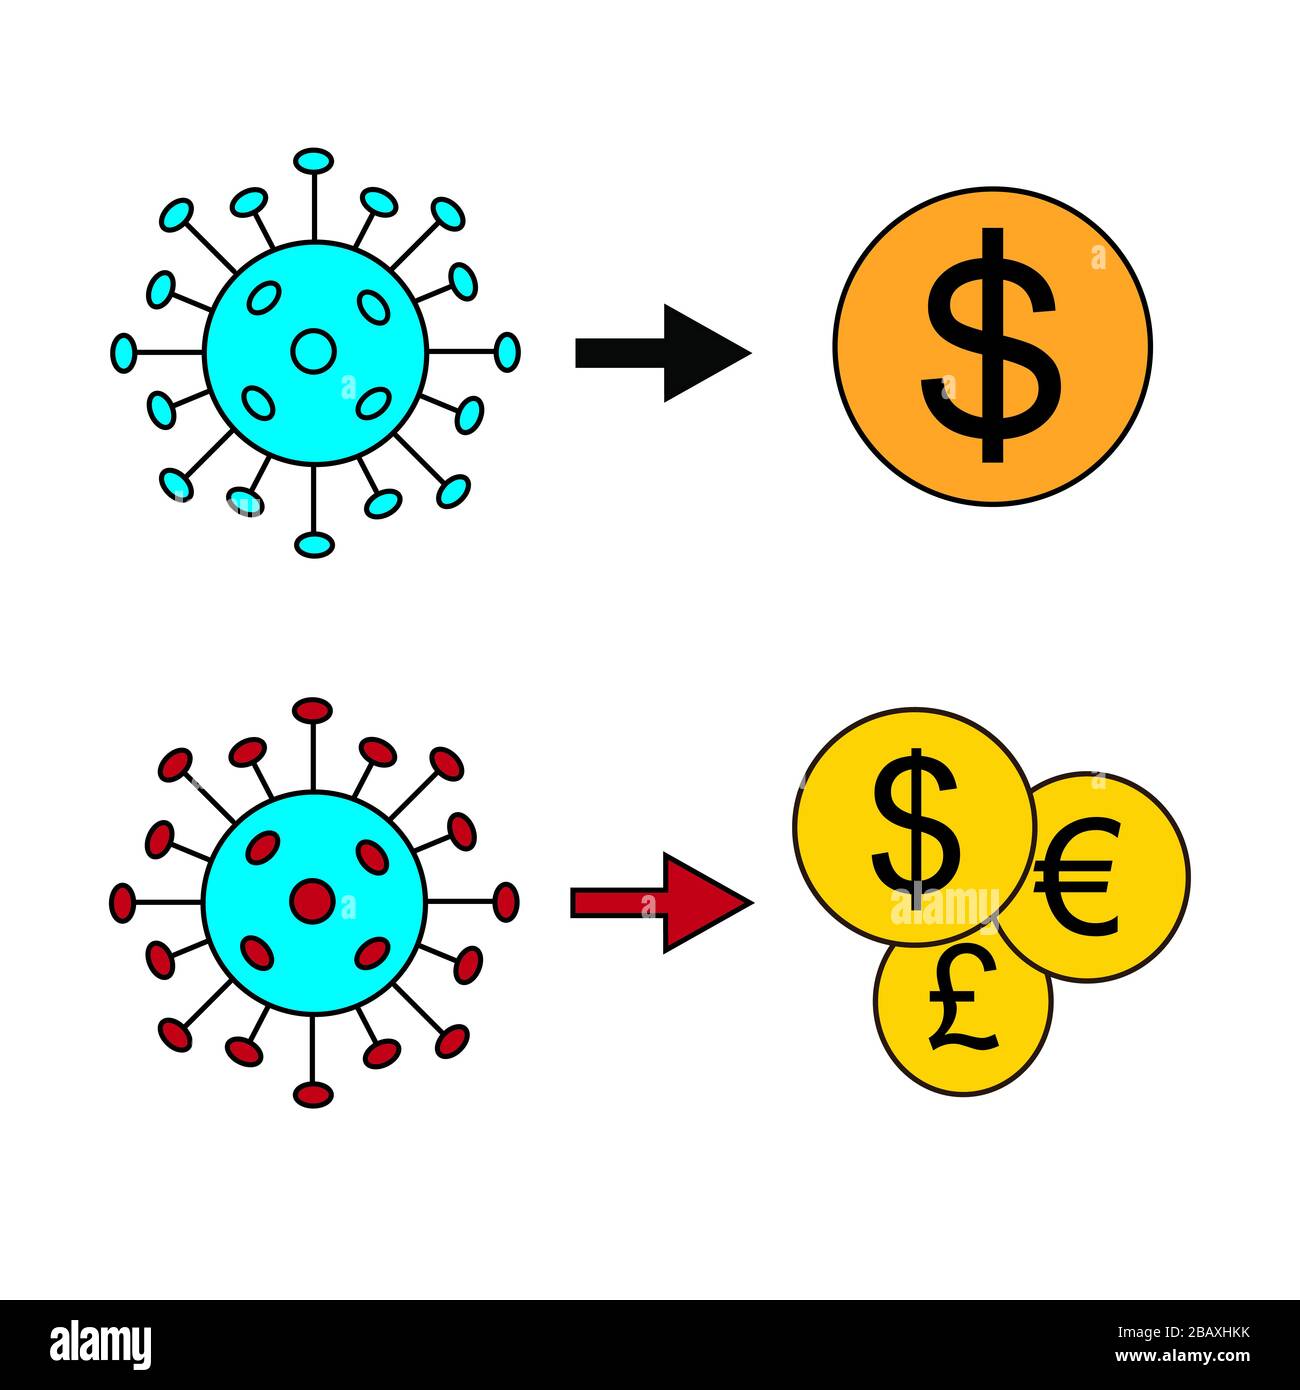 Coronavirus COVID-19 virus turning to a dollar and other currency. Concept illustration for makig money out of global pandemic and corona virus crisis Stock Photo